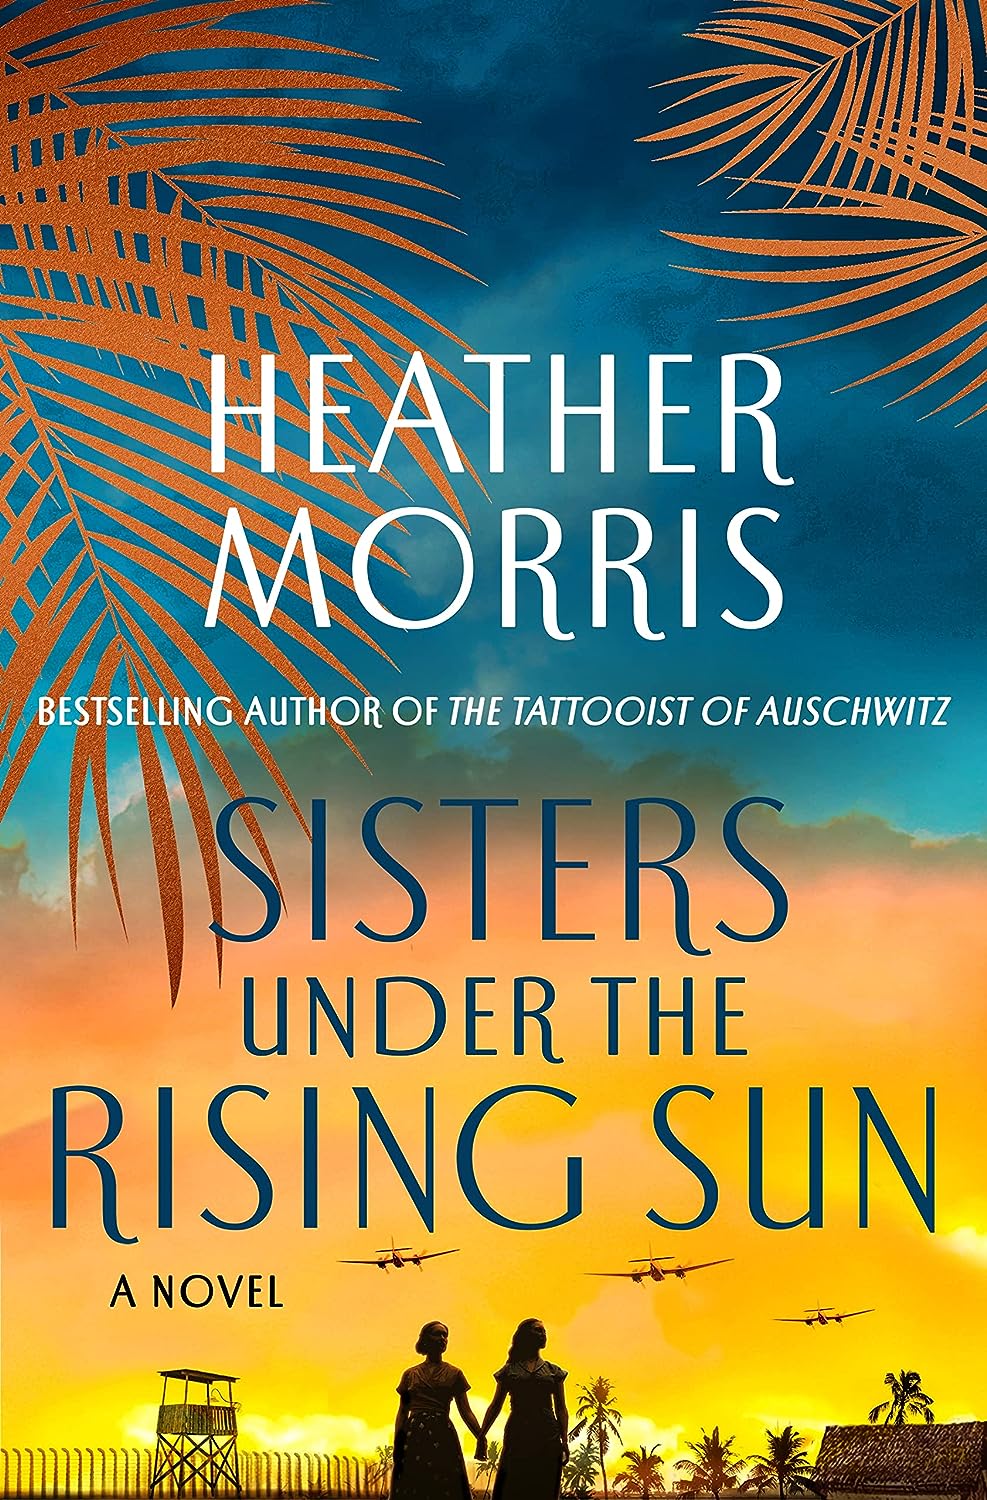 Image for "Sisters Under the Rising Sun"